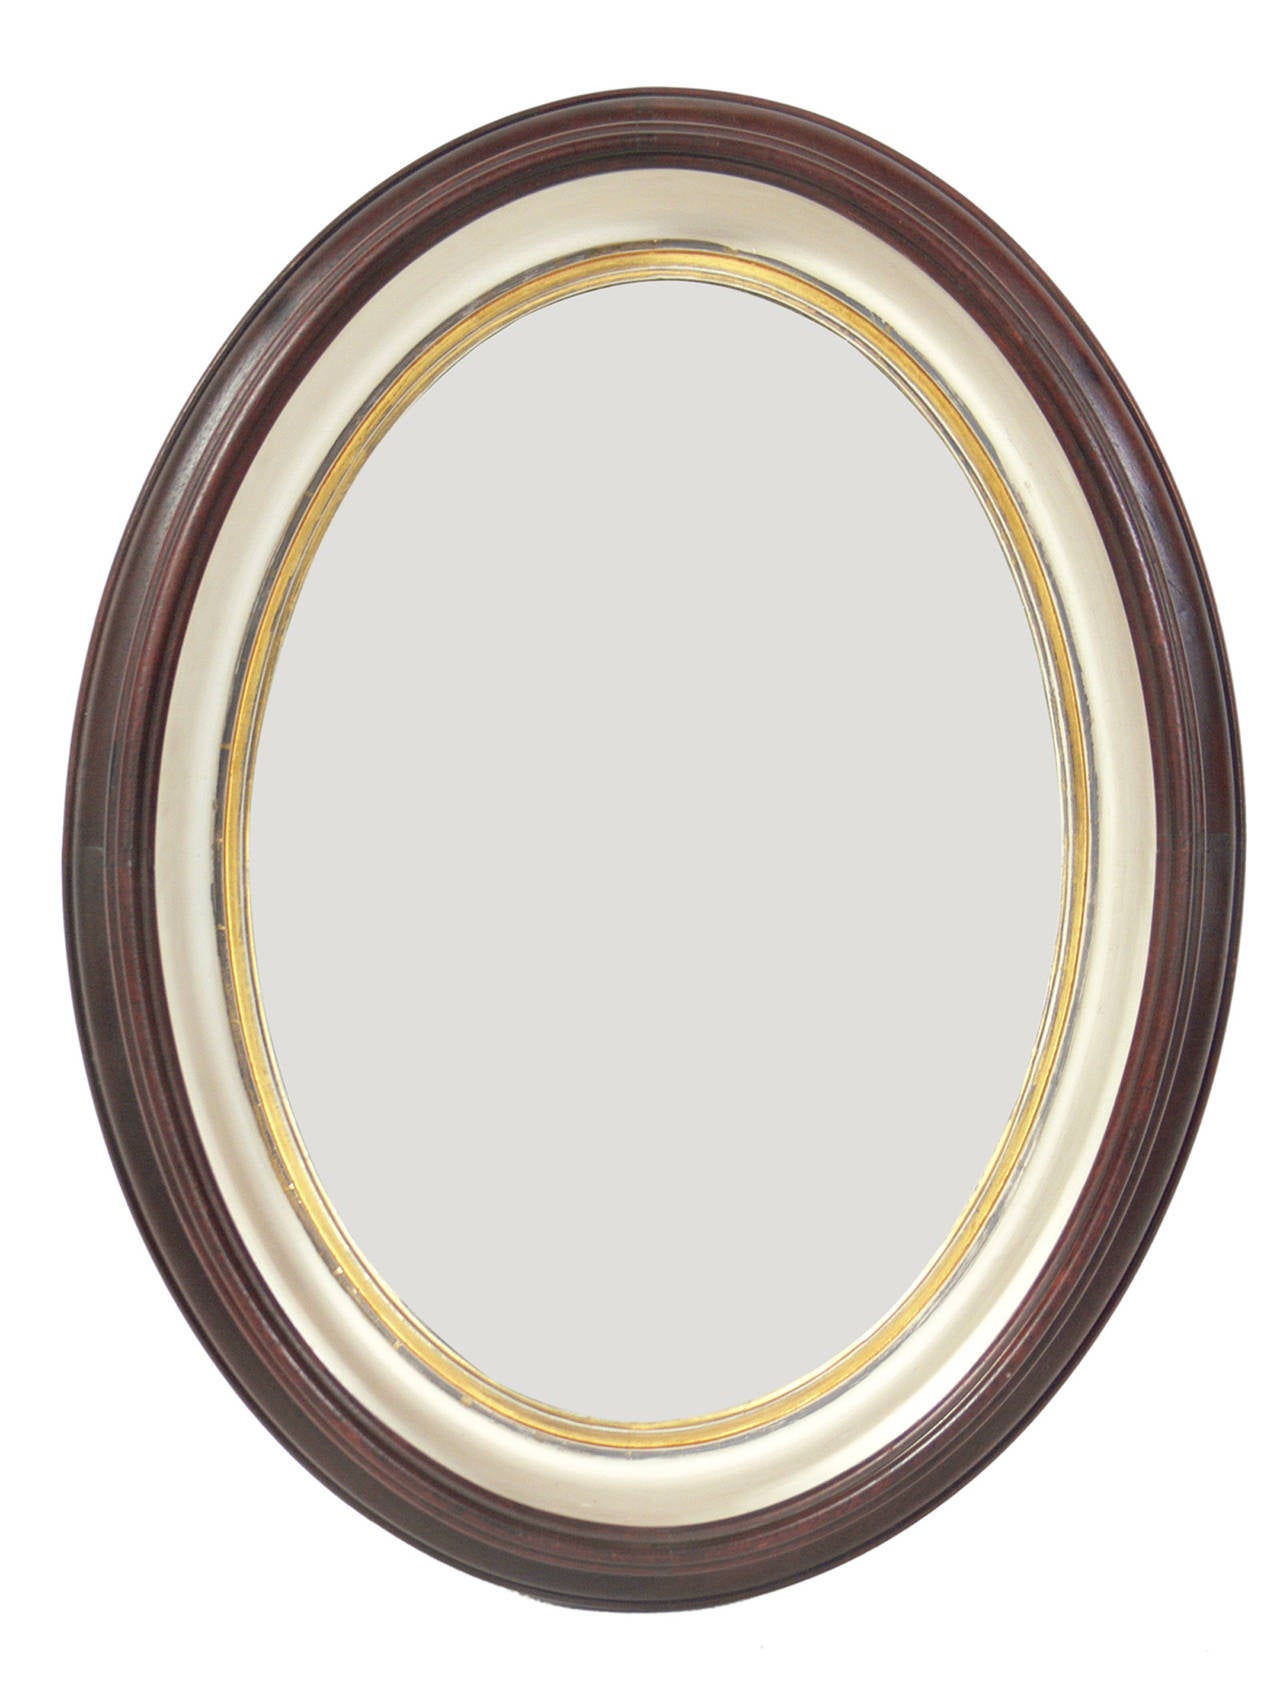 American Classical Group of Antique Mahogany Porthole Mirrors